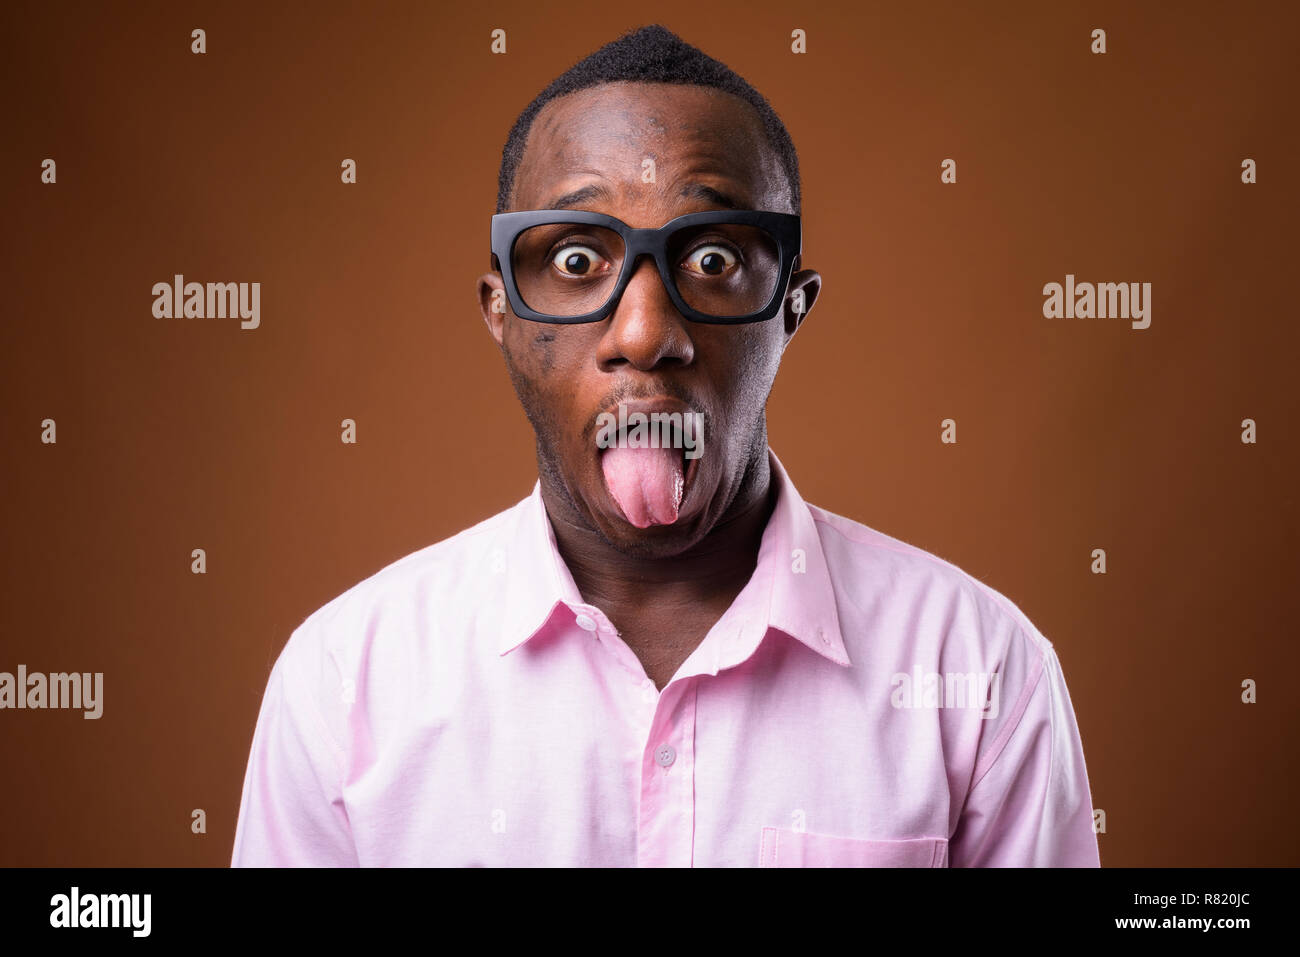 Portrait of young African businessman against brown background Stock Photo